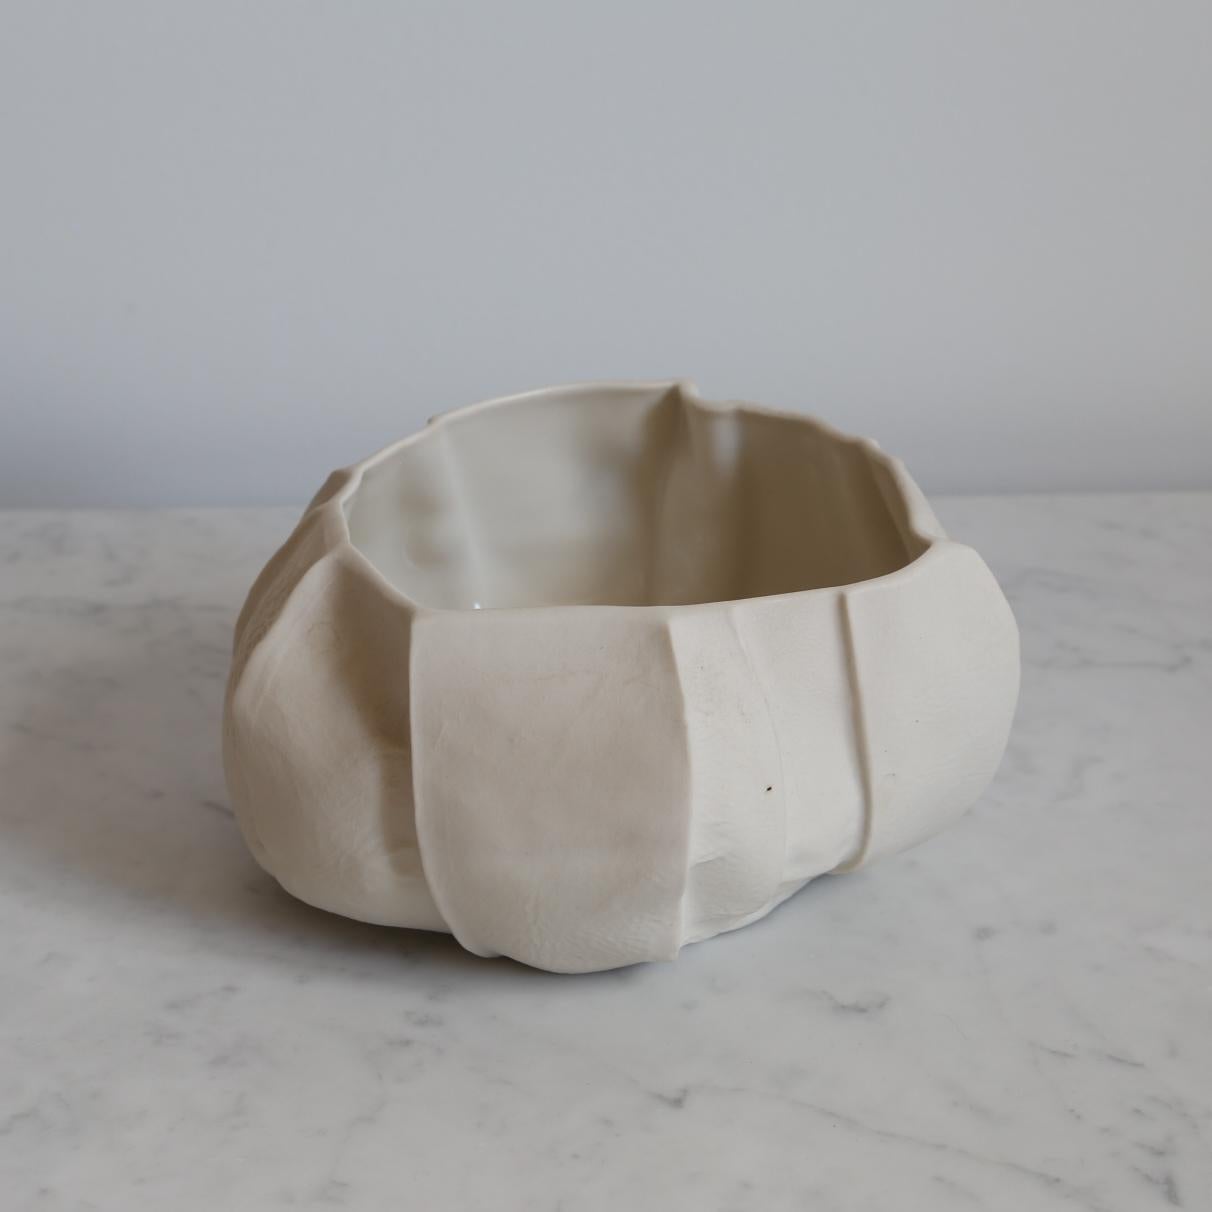 Cast One of a Kind Kawa Bowl by Luft Tanaka, Ceramic, Porcelain, in Stock